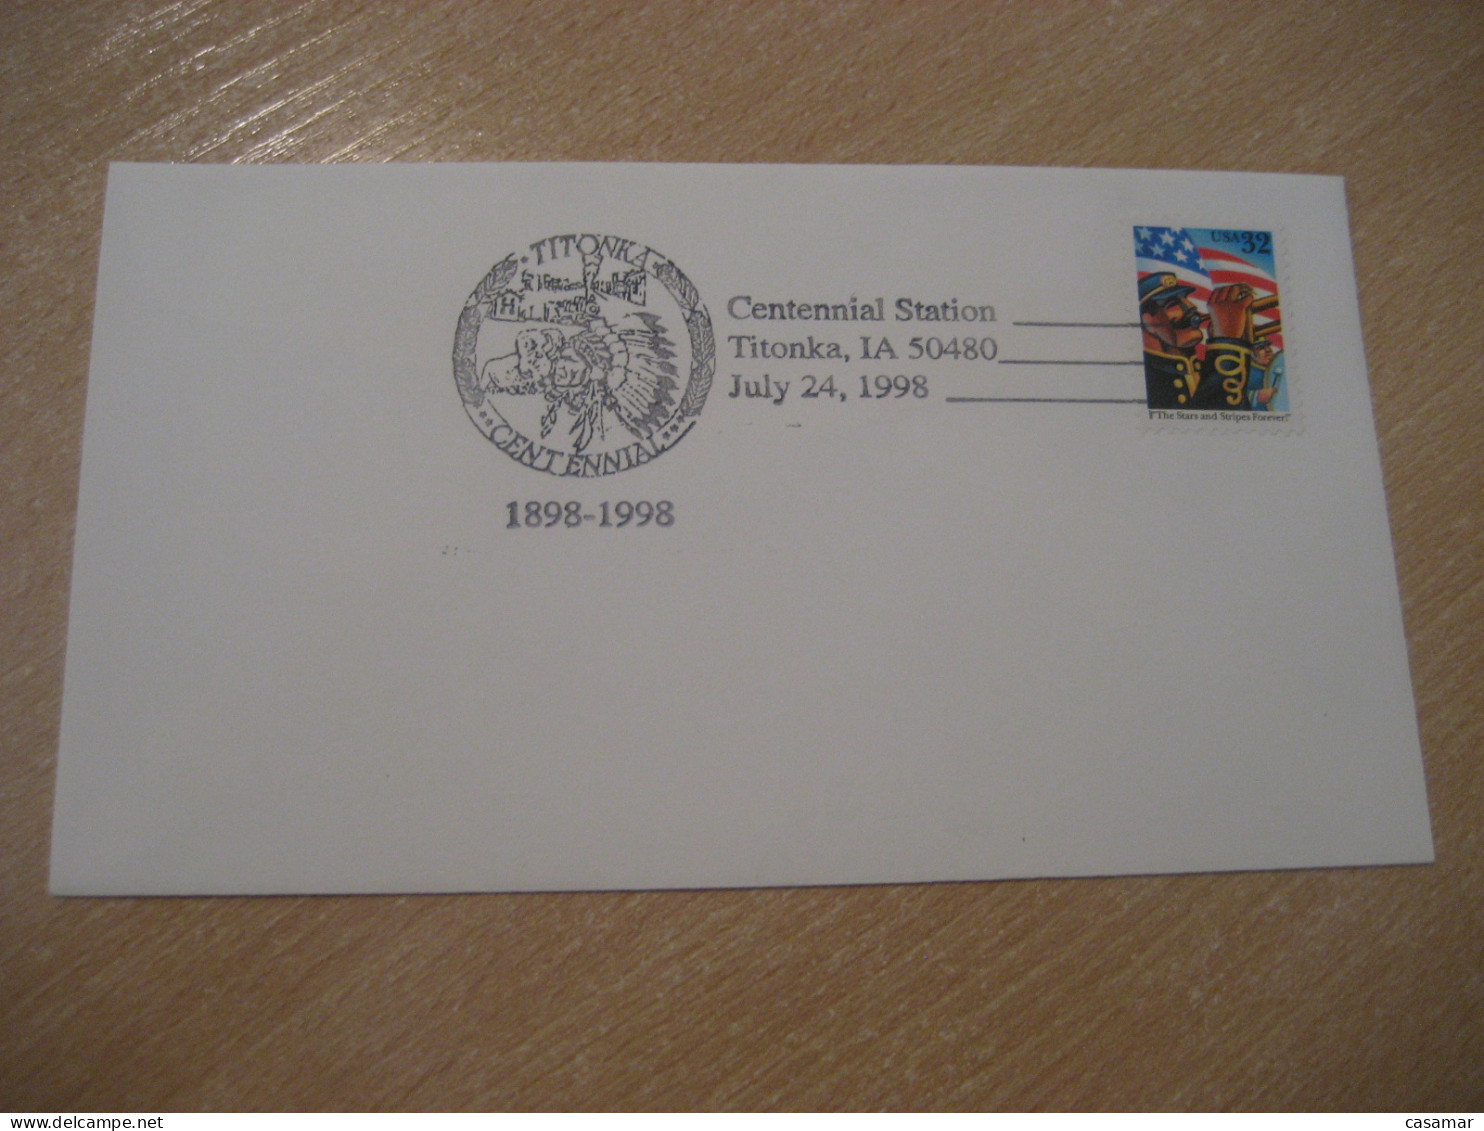 TITONKA 1998 Centennial American Indians Indian Cancel Cover USA Indigenous Native History - American Indians